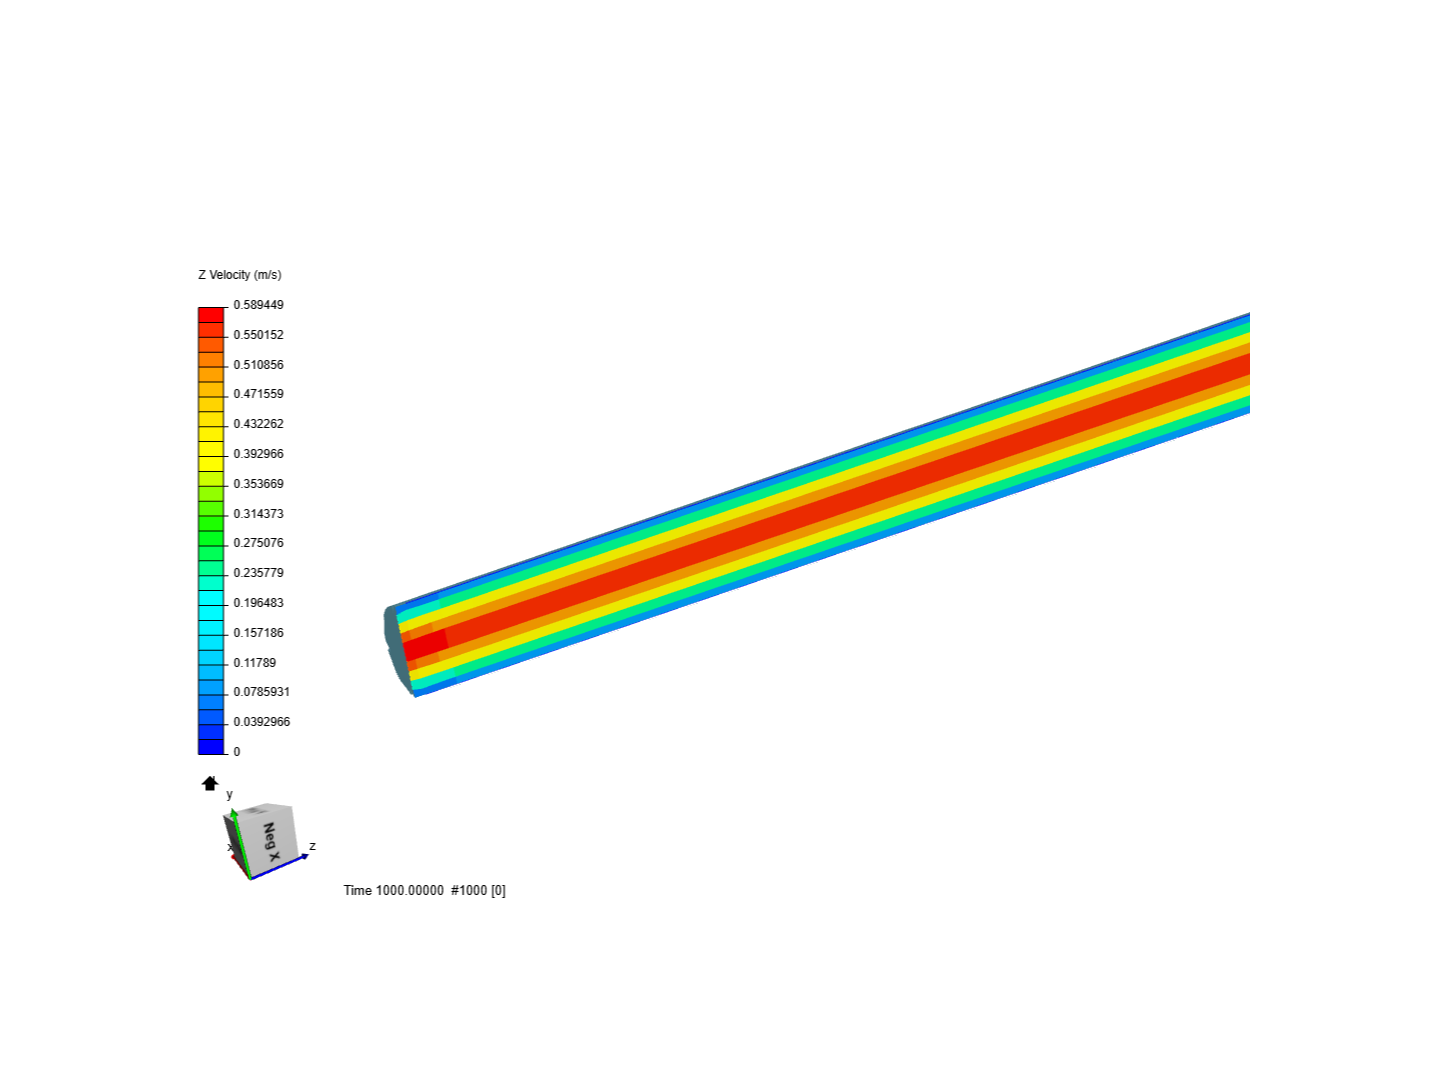 CFD 1 - Laminar Flow in a pipe image